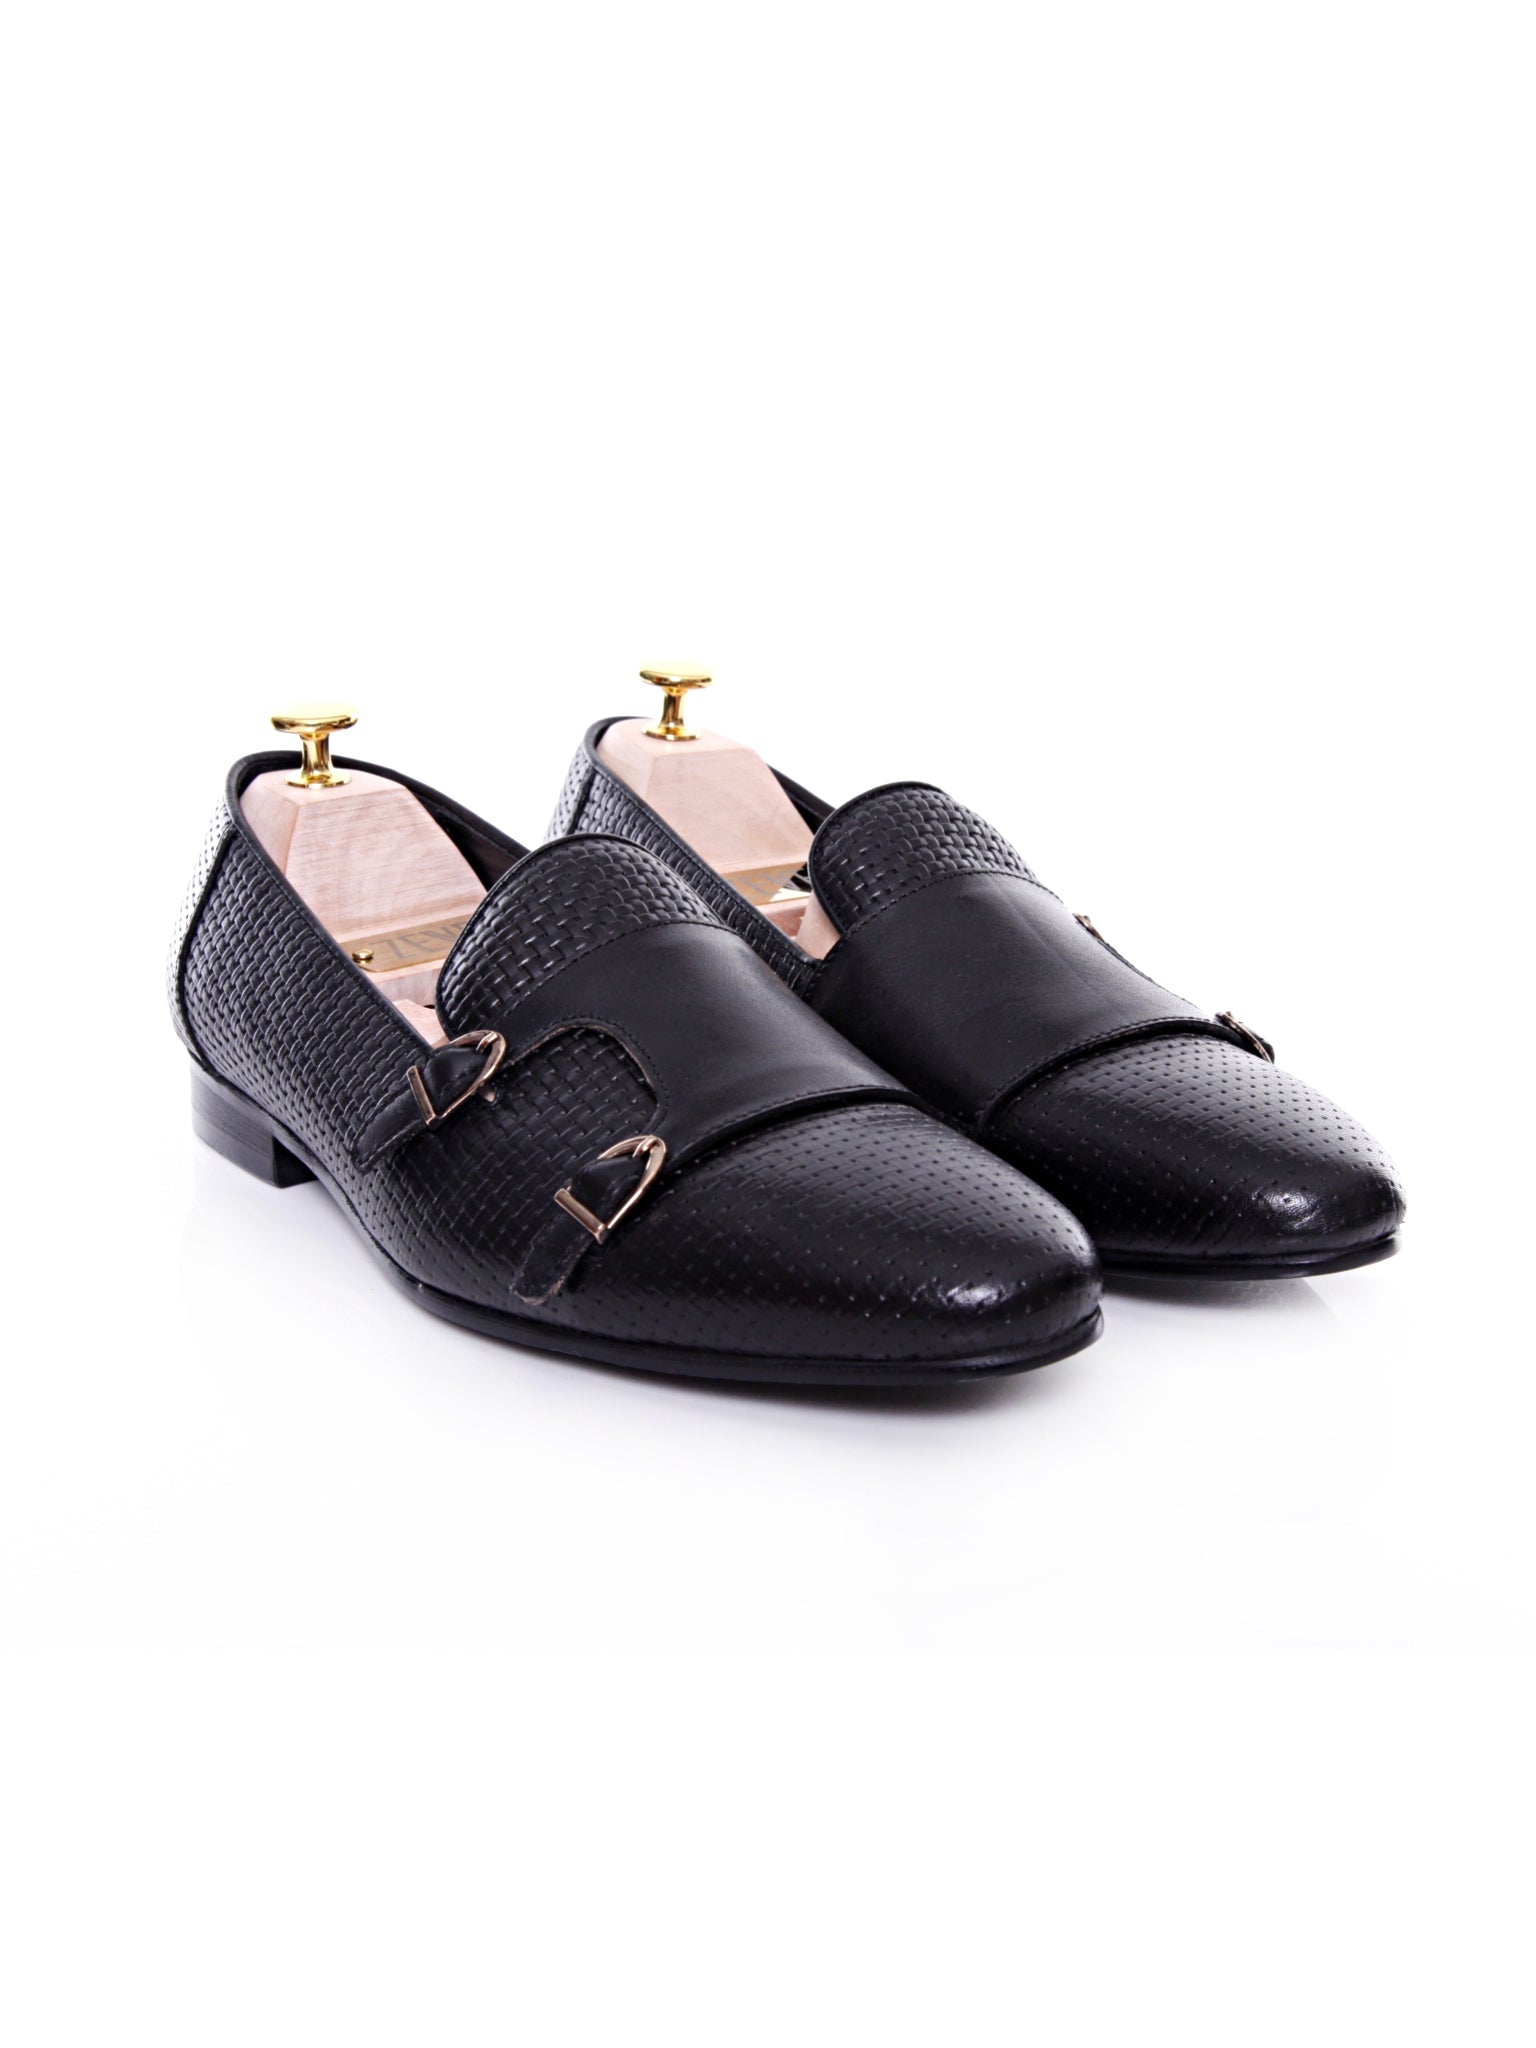 Loafer Slipper - Black Double Monk Strap with Woven Leather - Zeve Shoes